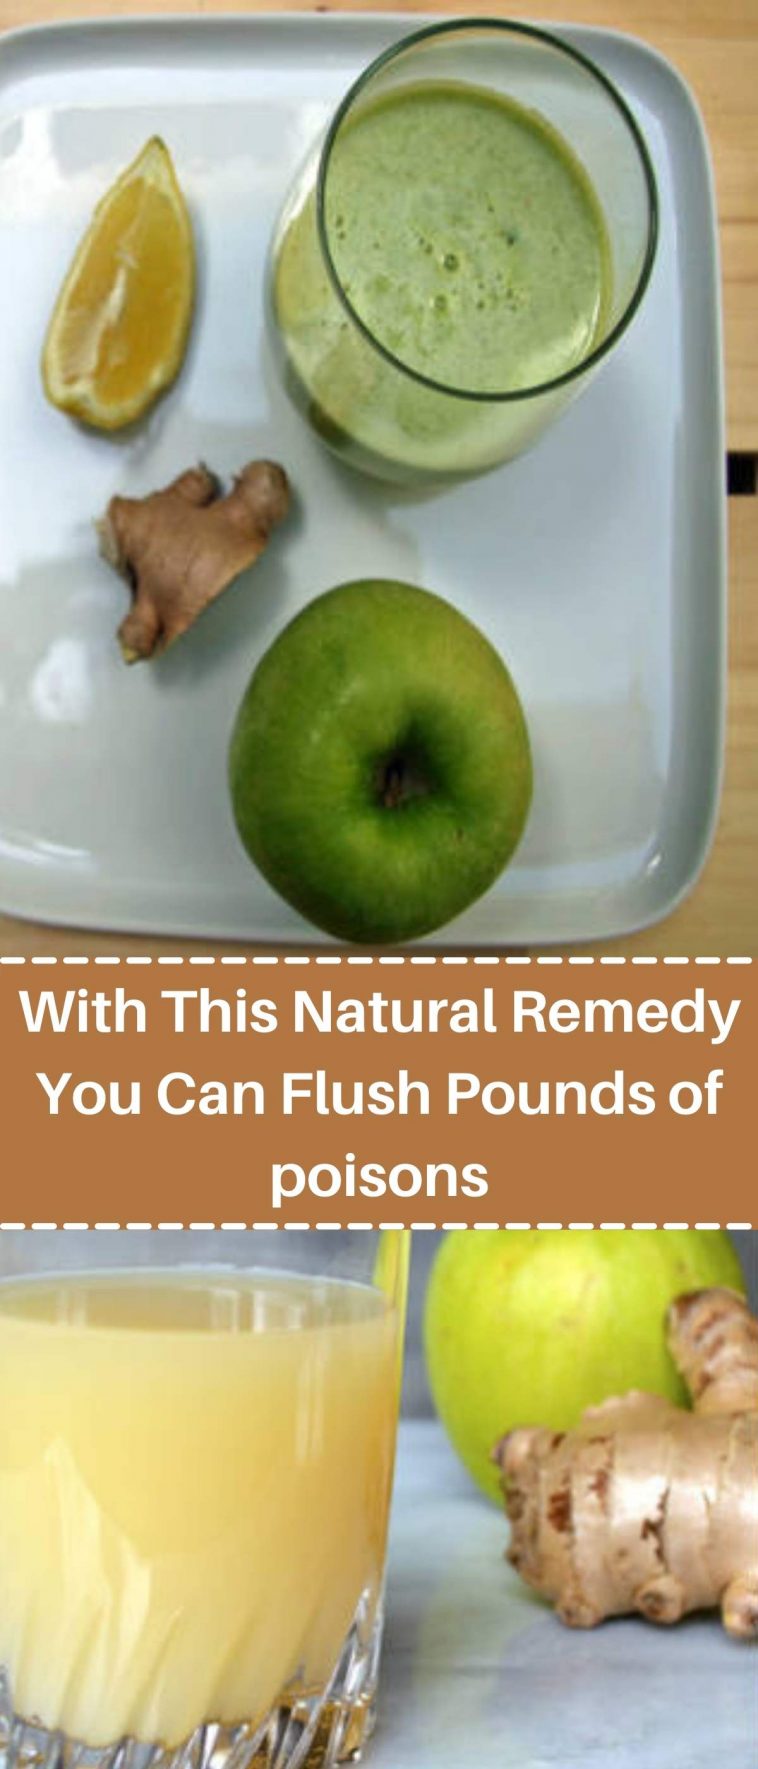 With This Natural Remedy You Can Flush Pounds of poisons From Your Body